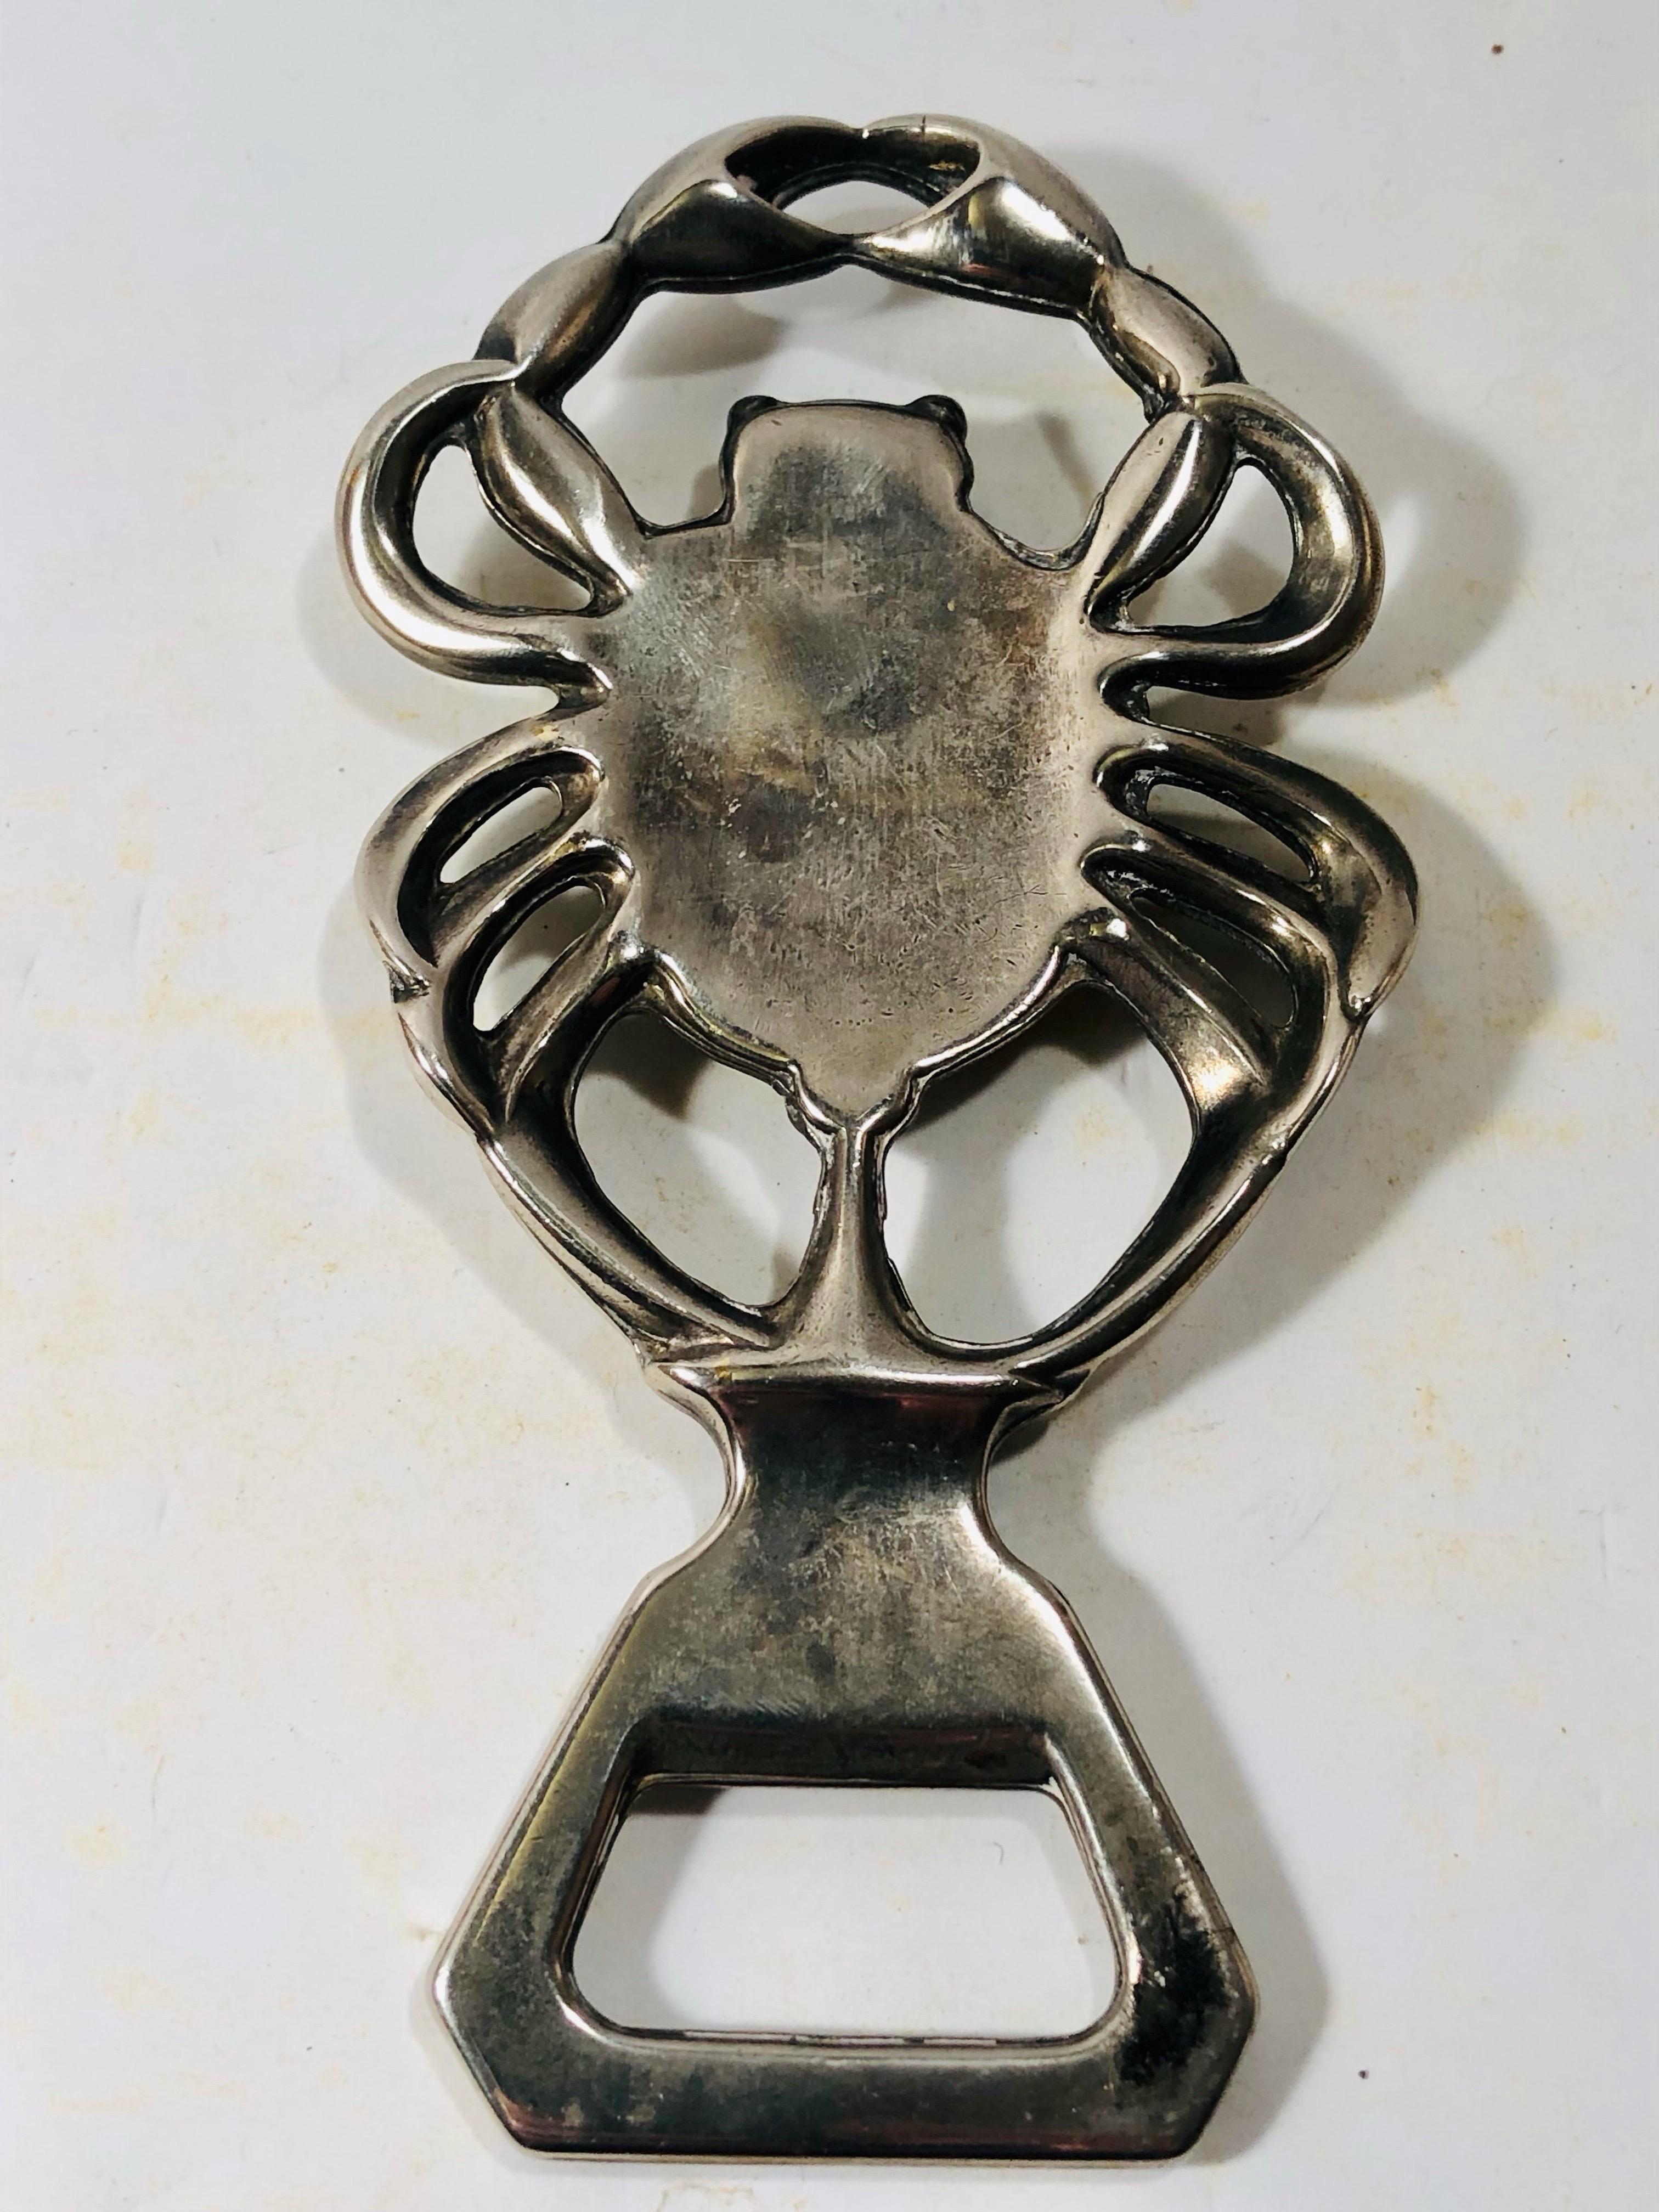 A bottle opener from the 1970s, in silver-plated metal, themed around the signs of the zodiac, depicting the Cancer sign.

An item that is both functional and decorative, ideal for collectors or enthusiasts of vintage design and astrology.

Great